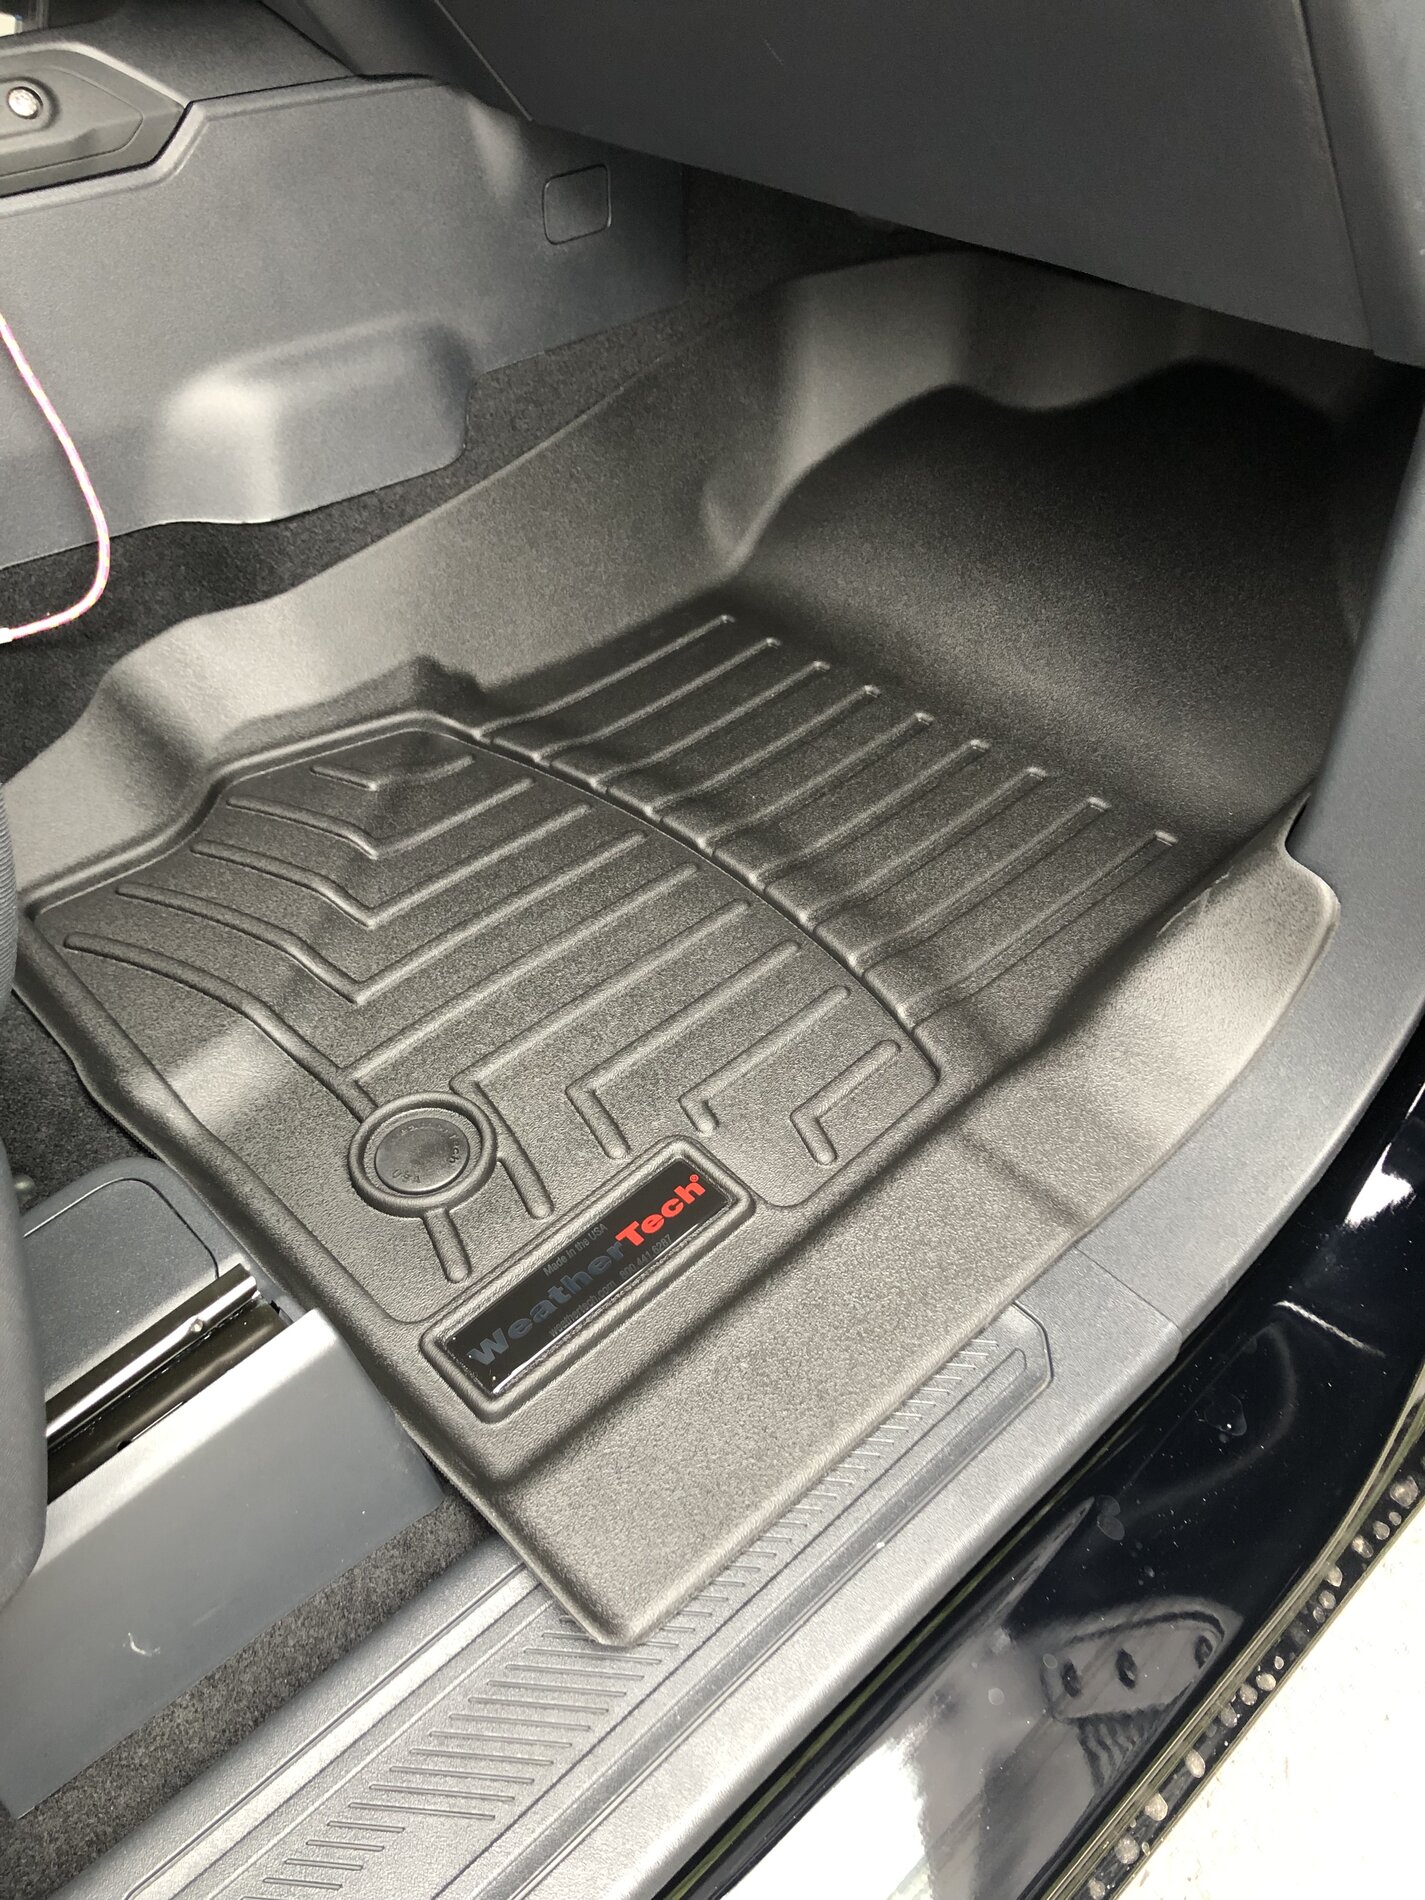 Ford Bronco Bronco Weathertech Floor Liners and Cargo Liners now available 83DC8A04-05C6-489F-B3CB-0ED089DF532C